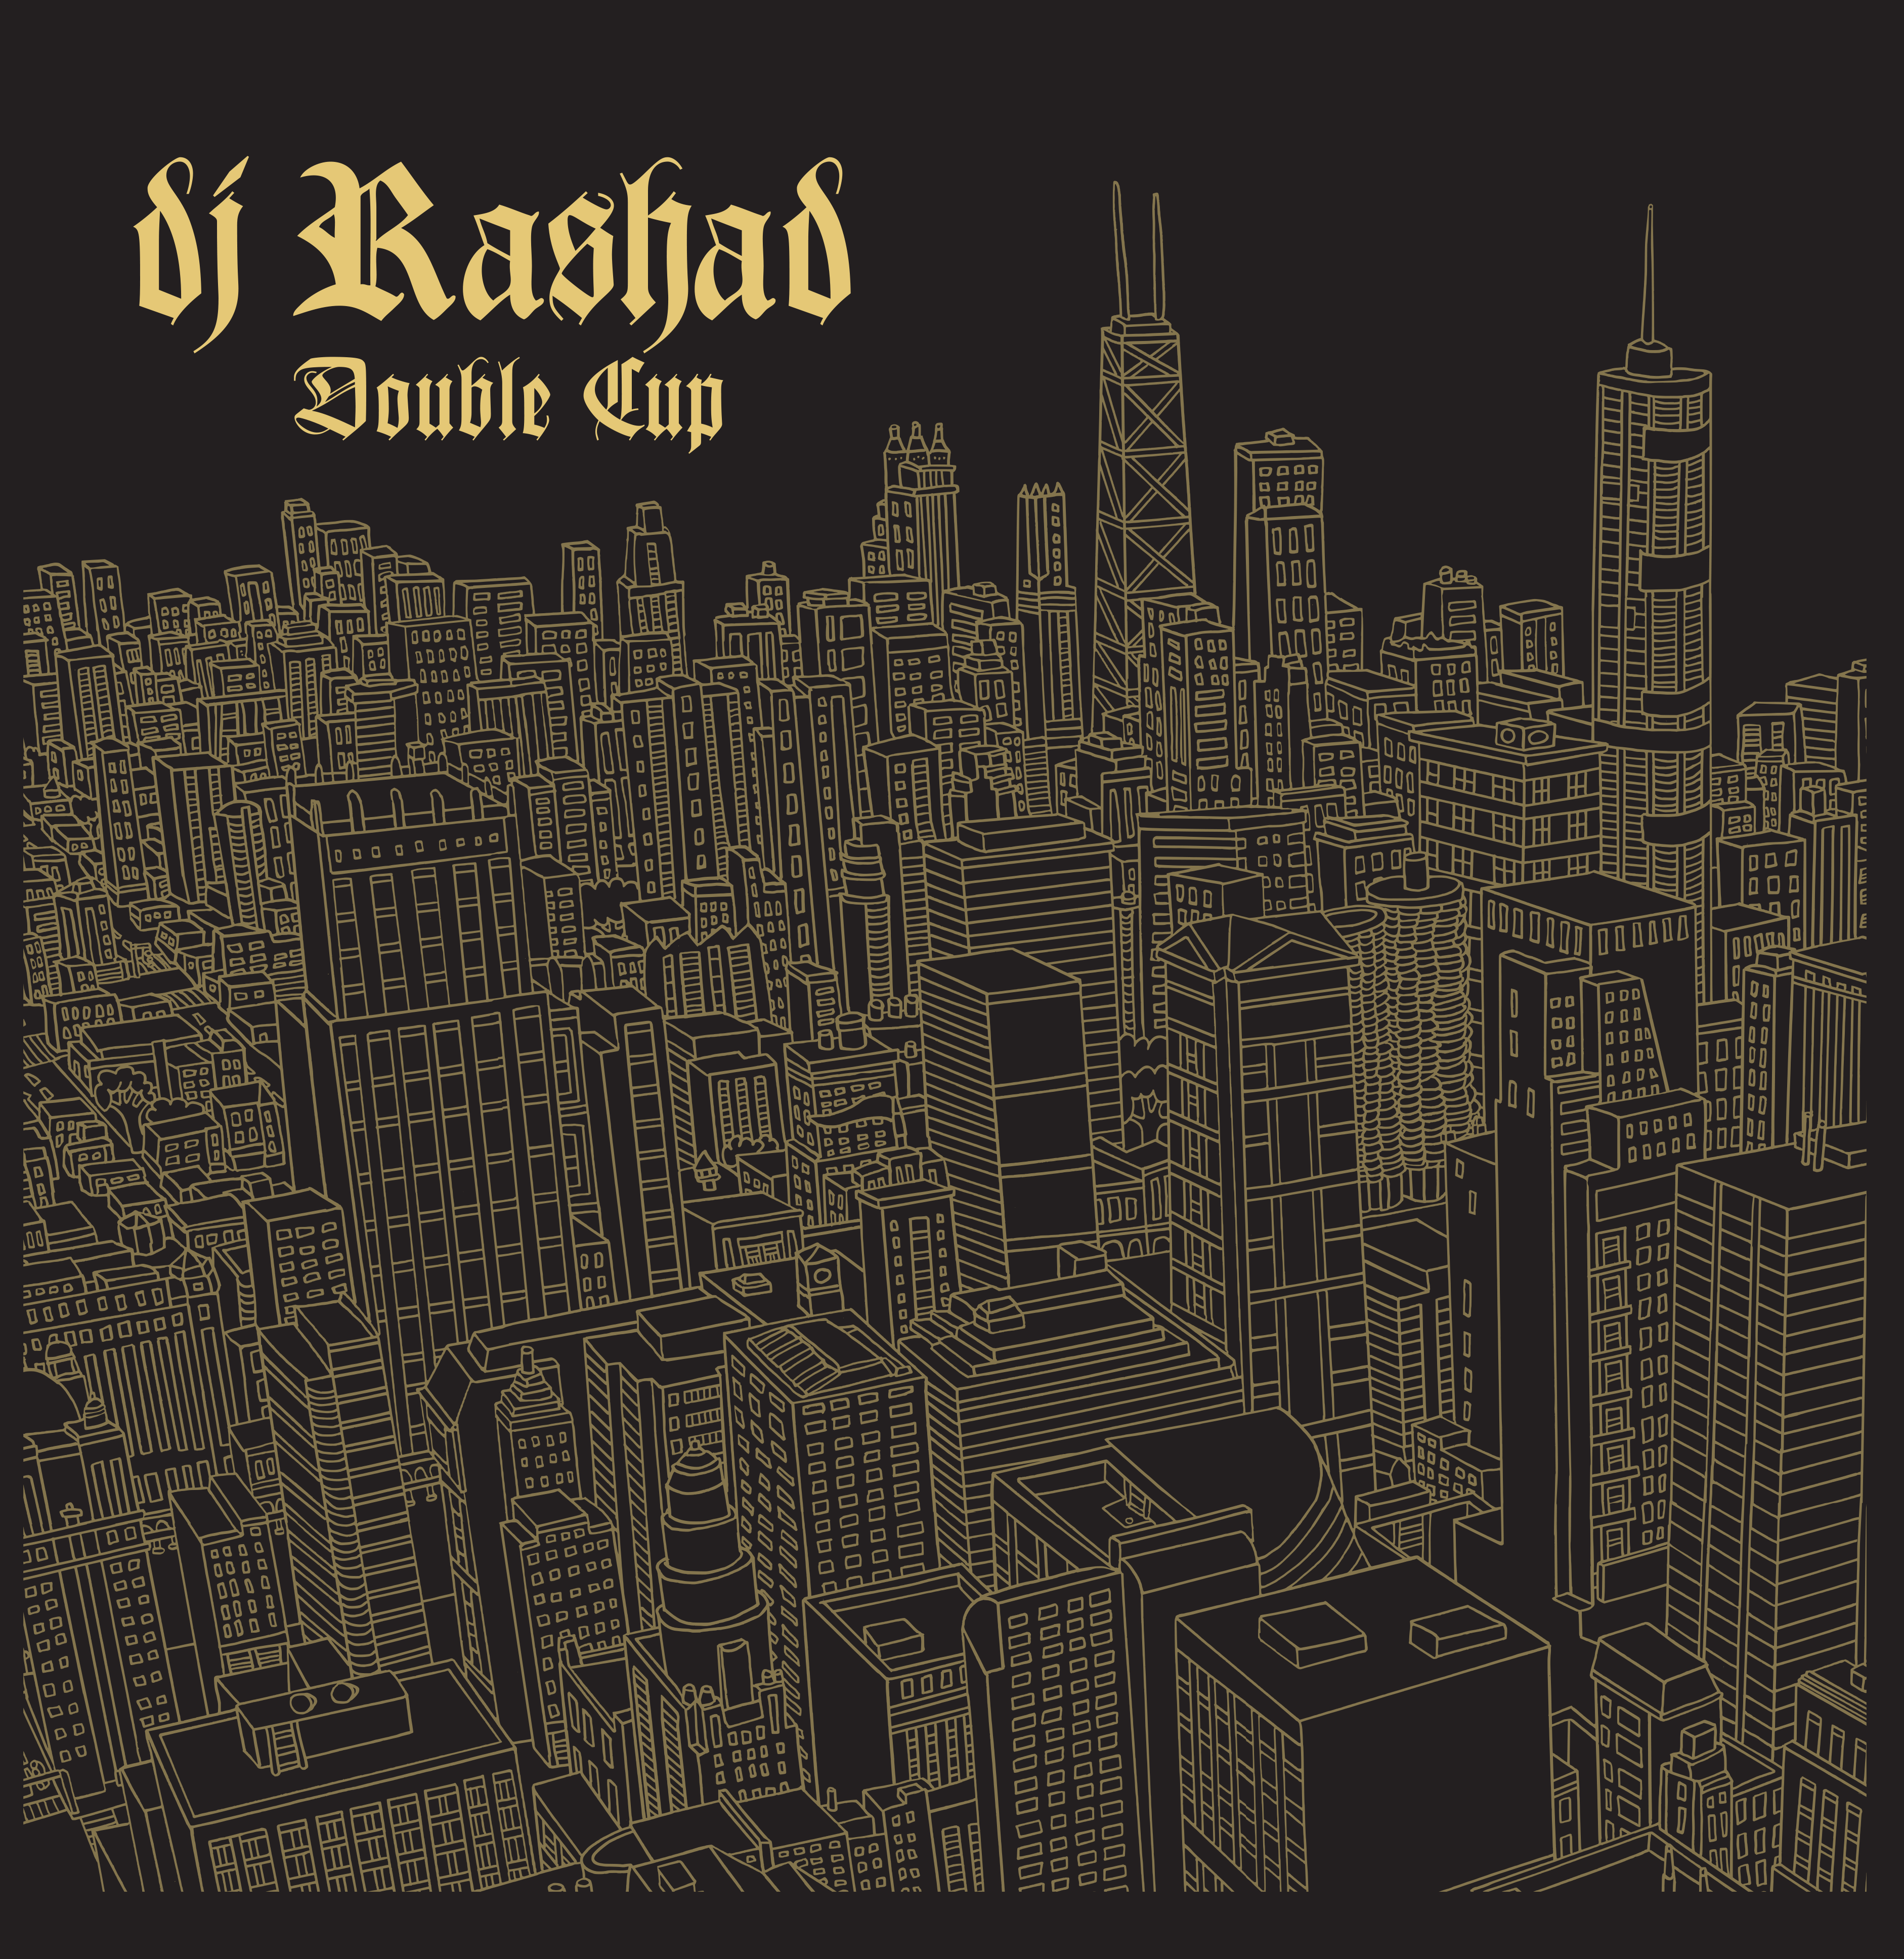 Double Cup (10 Year Anniversary): Limited Gold Vinyl LP + Exclusive Gold Foil Art Print